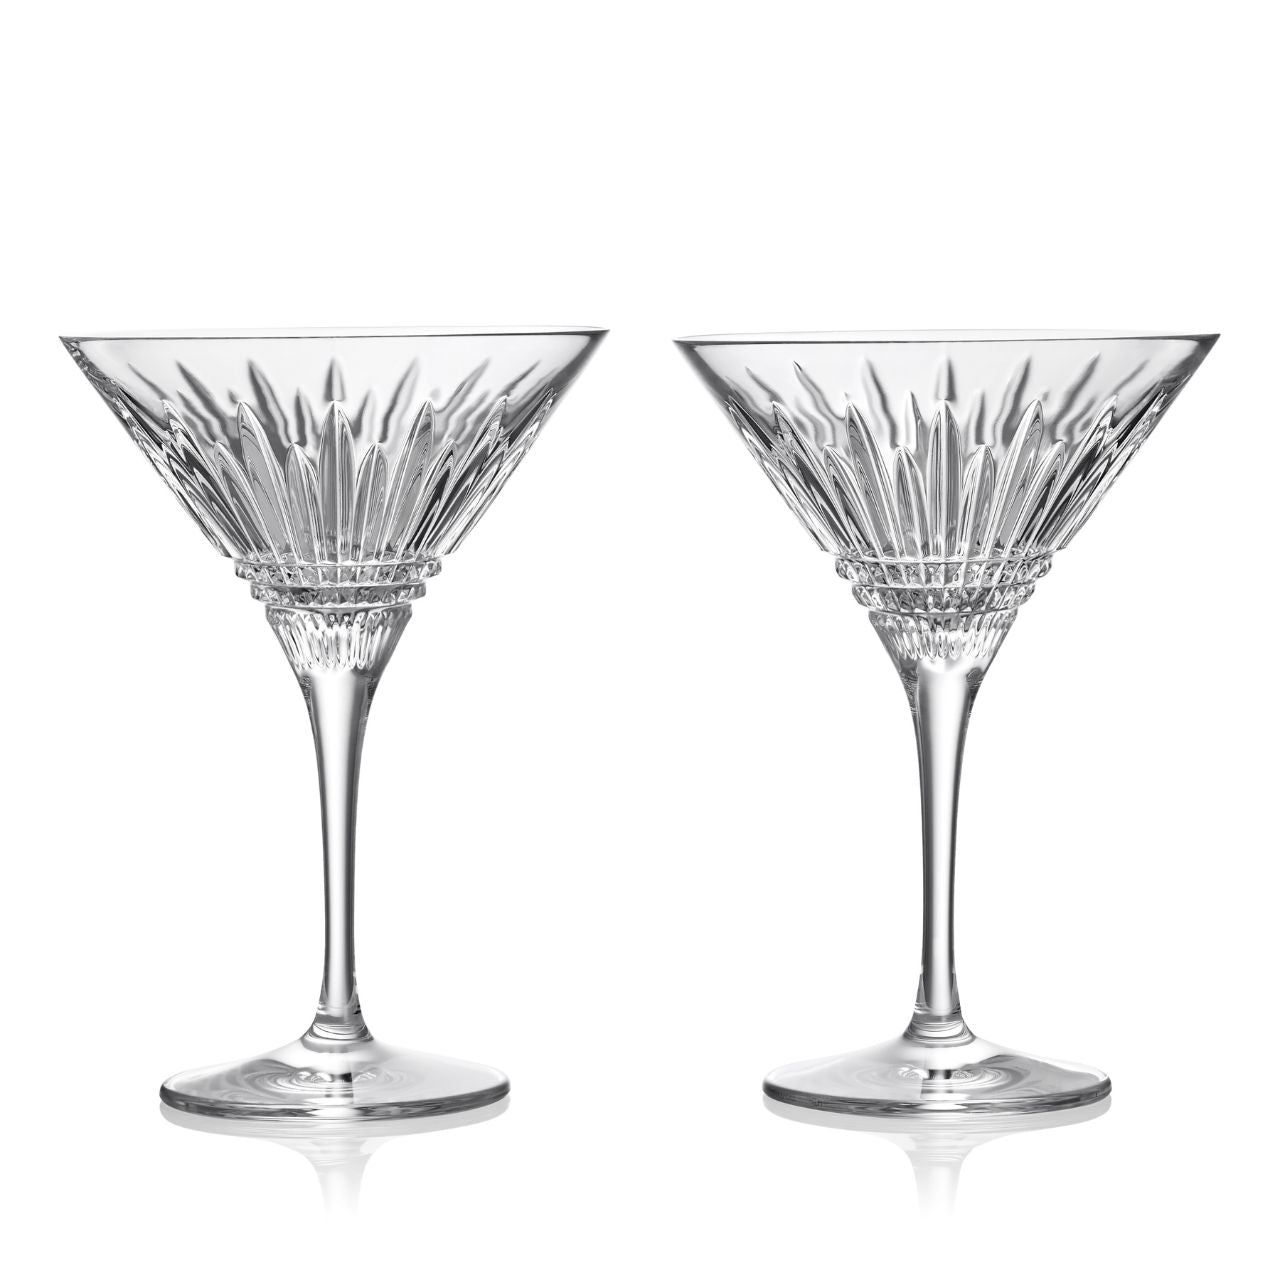 Waterford Crystal Lismore Diamond Martini Glasses Pair  The Lismore Diamond pattern is a strikingly modern reinvention of the Waterford classic, characterized by intricate diamond cuts rendered in radiant fine crystal. The clarity of this radiant Lismore Diamond Martini Glass Pair, ensures that the rich colour of its contents is highlighted beautifully, serving as a feast for the eye as well as the palette.